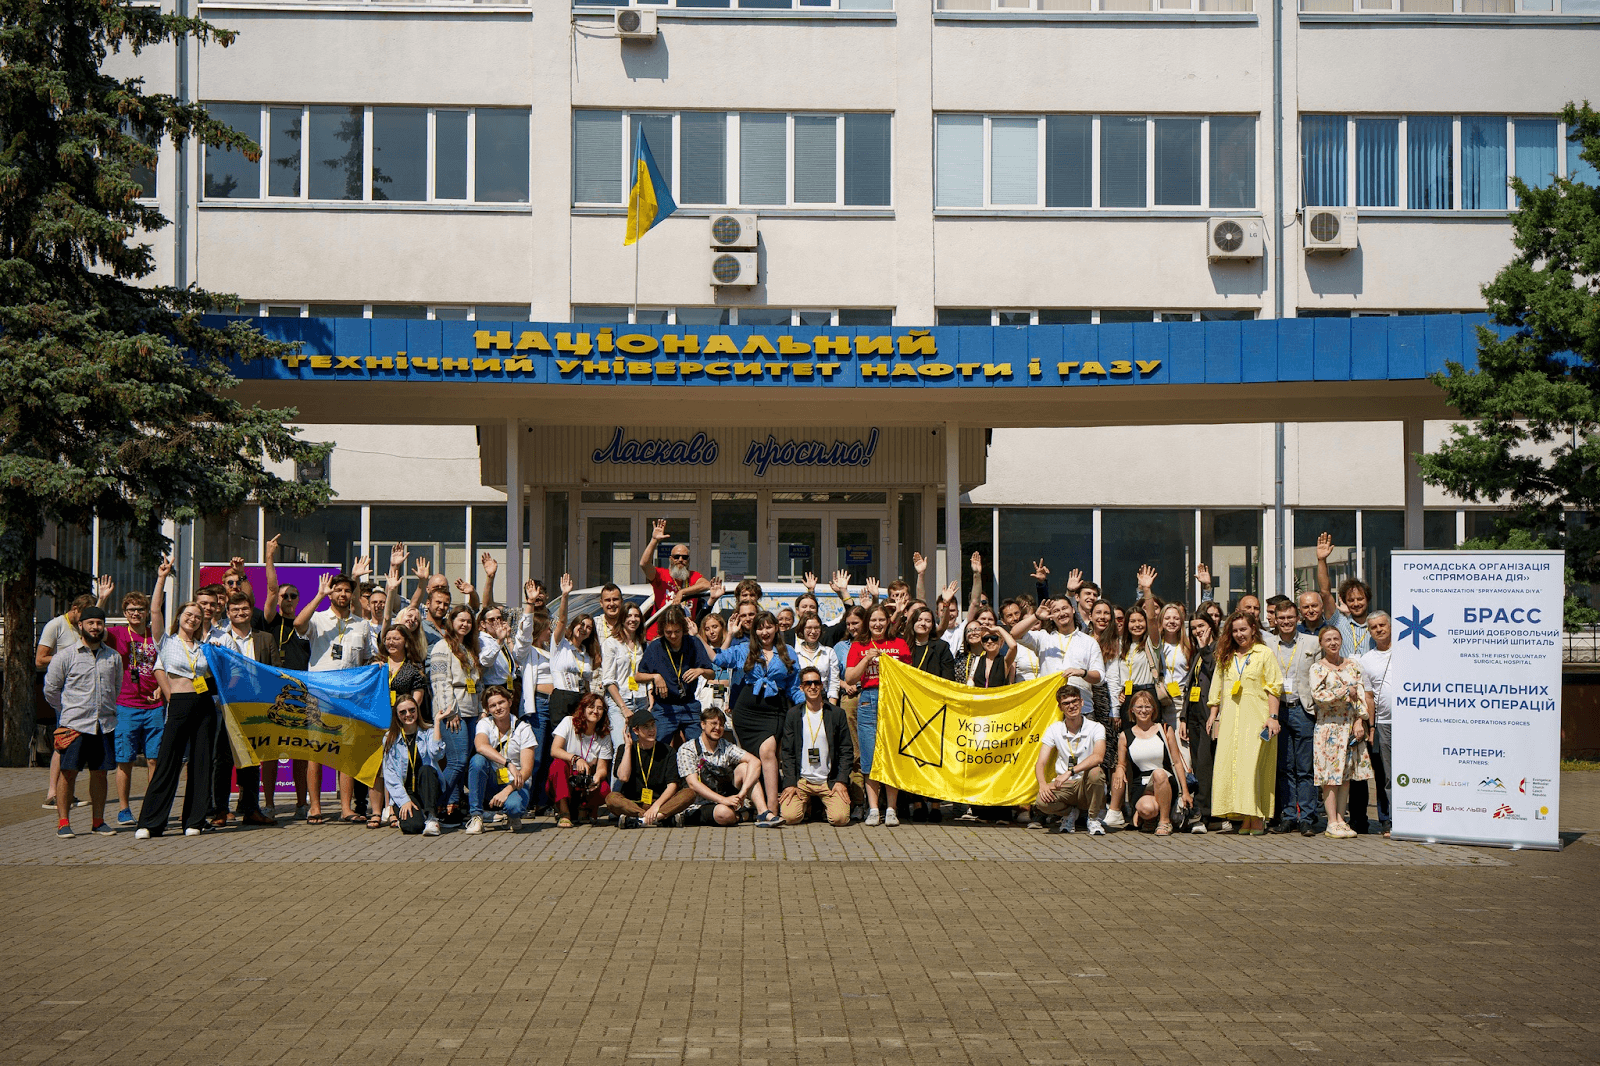 For the first time since 2018, Students For Liberty returned to Ukraine with a two-day conference: Ukrainian Renaissance!